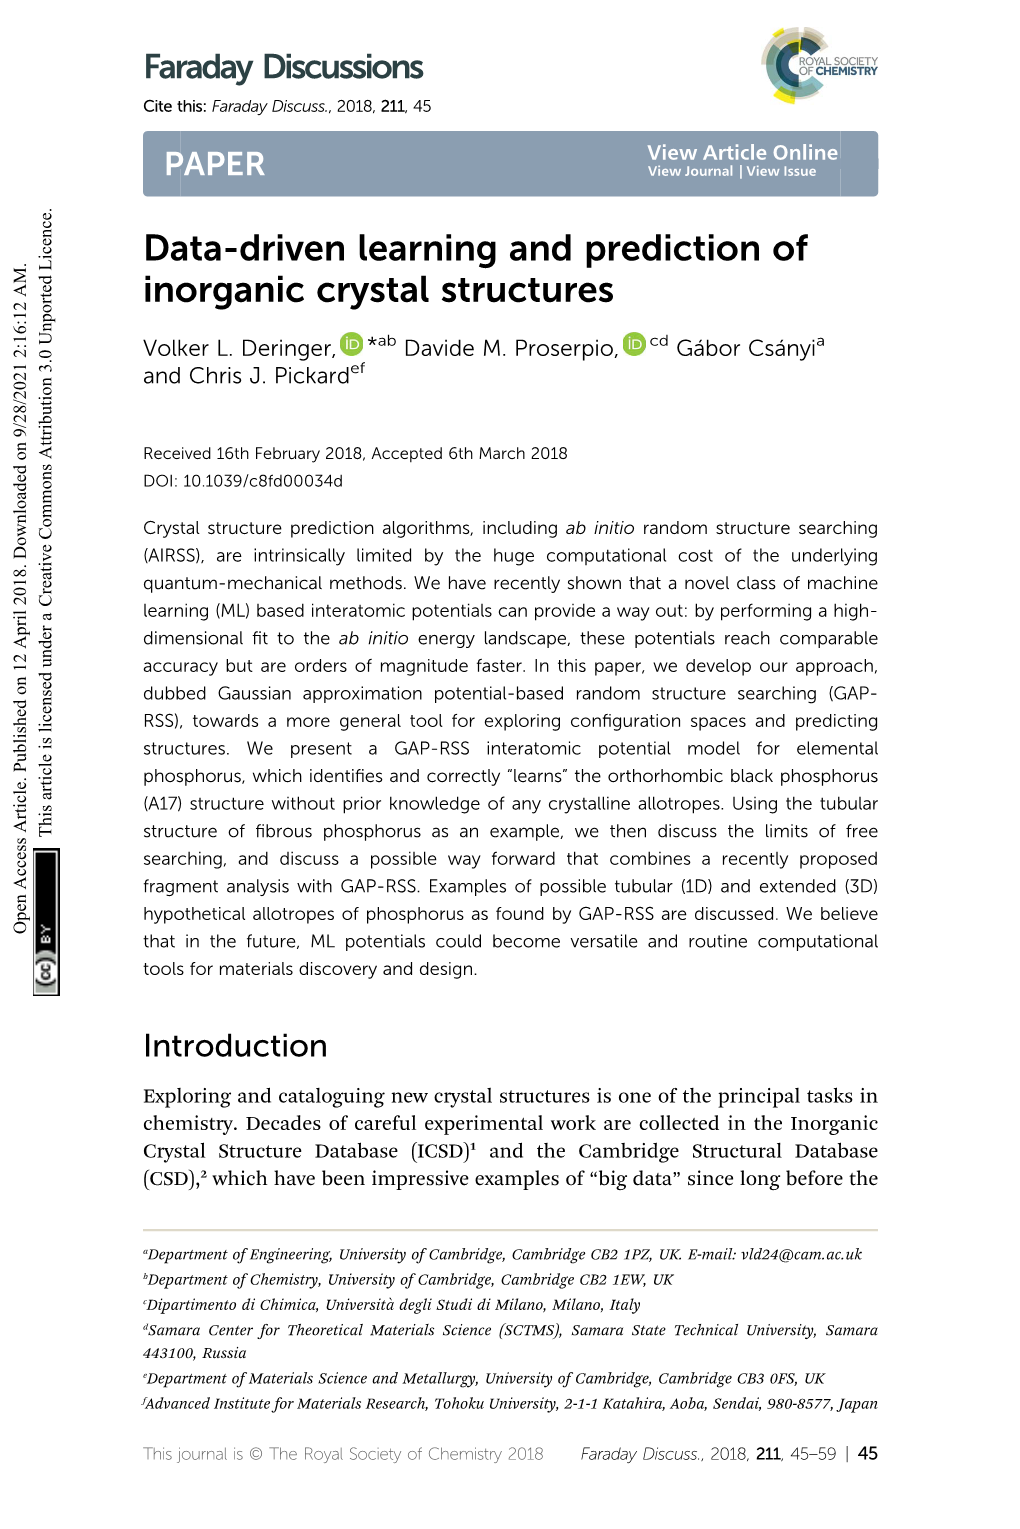 Data-Driven Learning and Prediction of Inorganic Crystal Structures